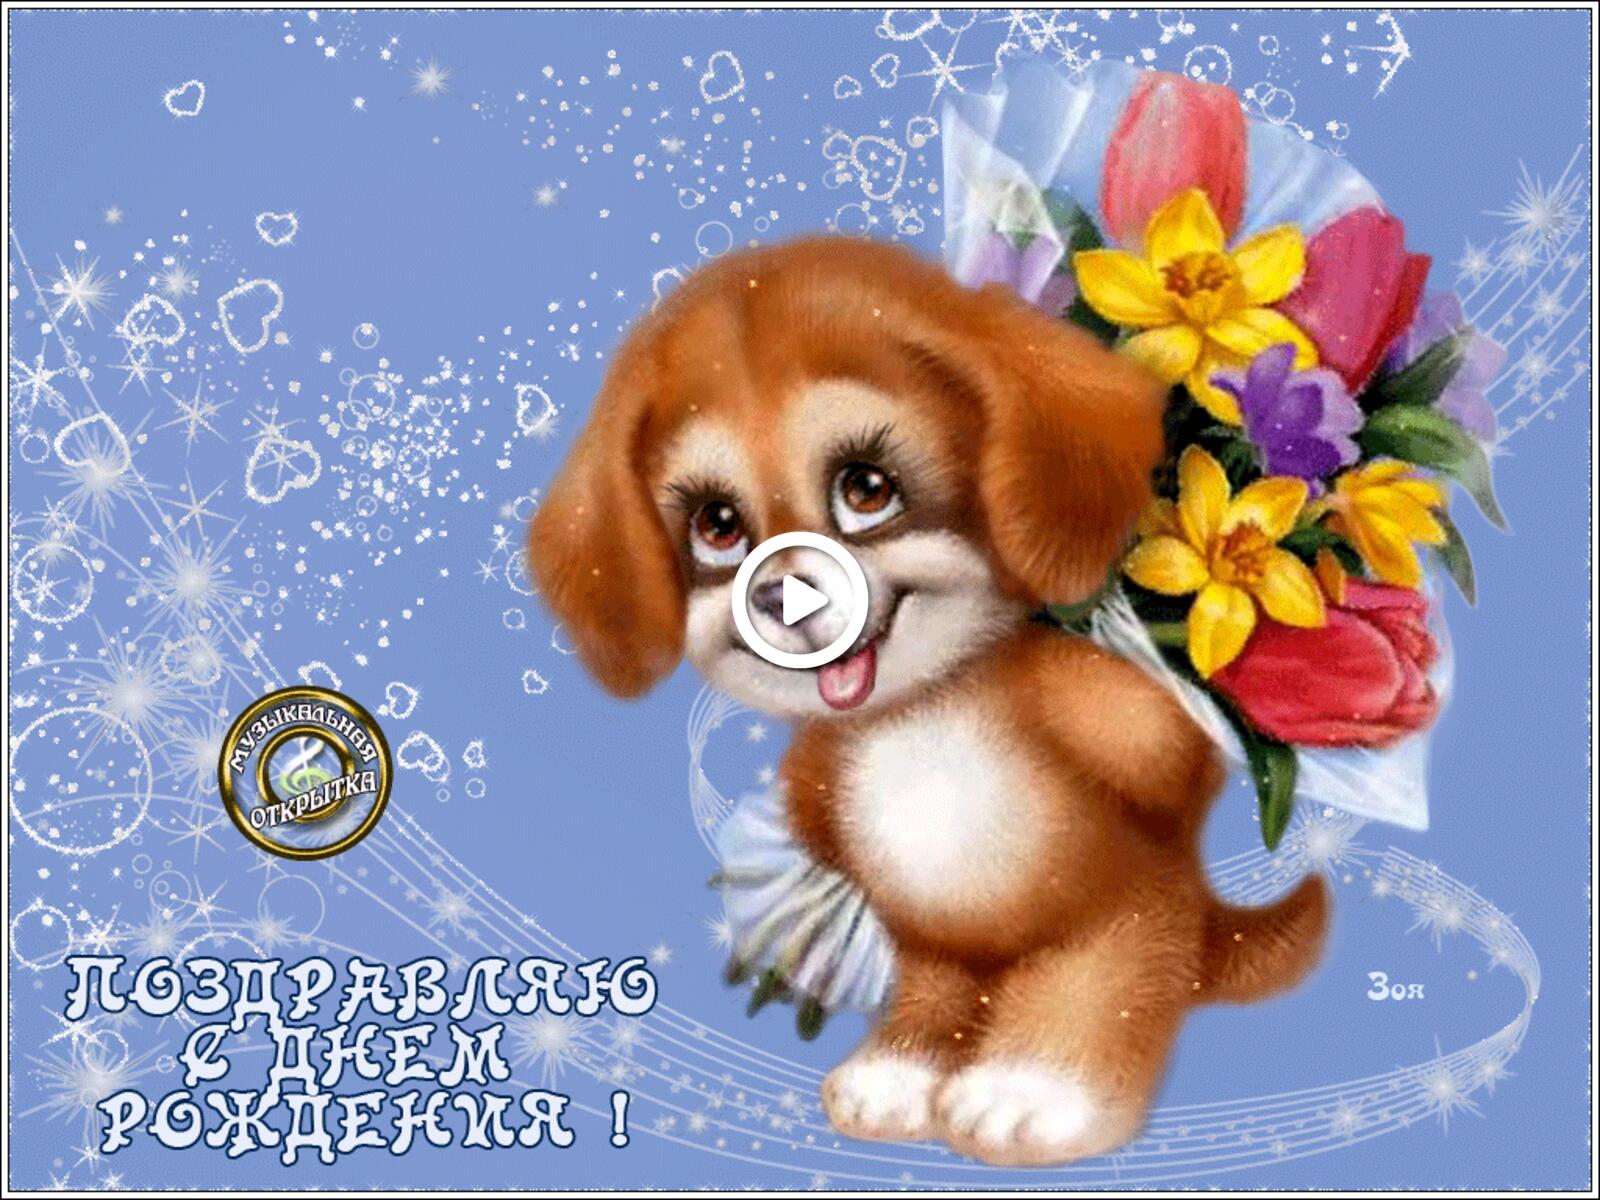 Free postcard Cute puppy with a bouquet of flowers for his birthday